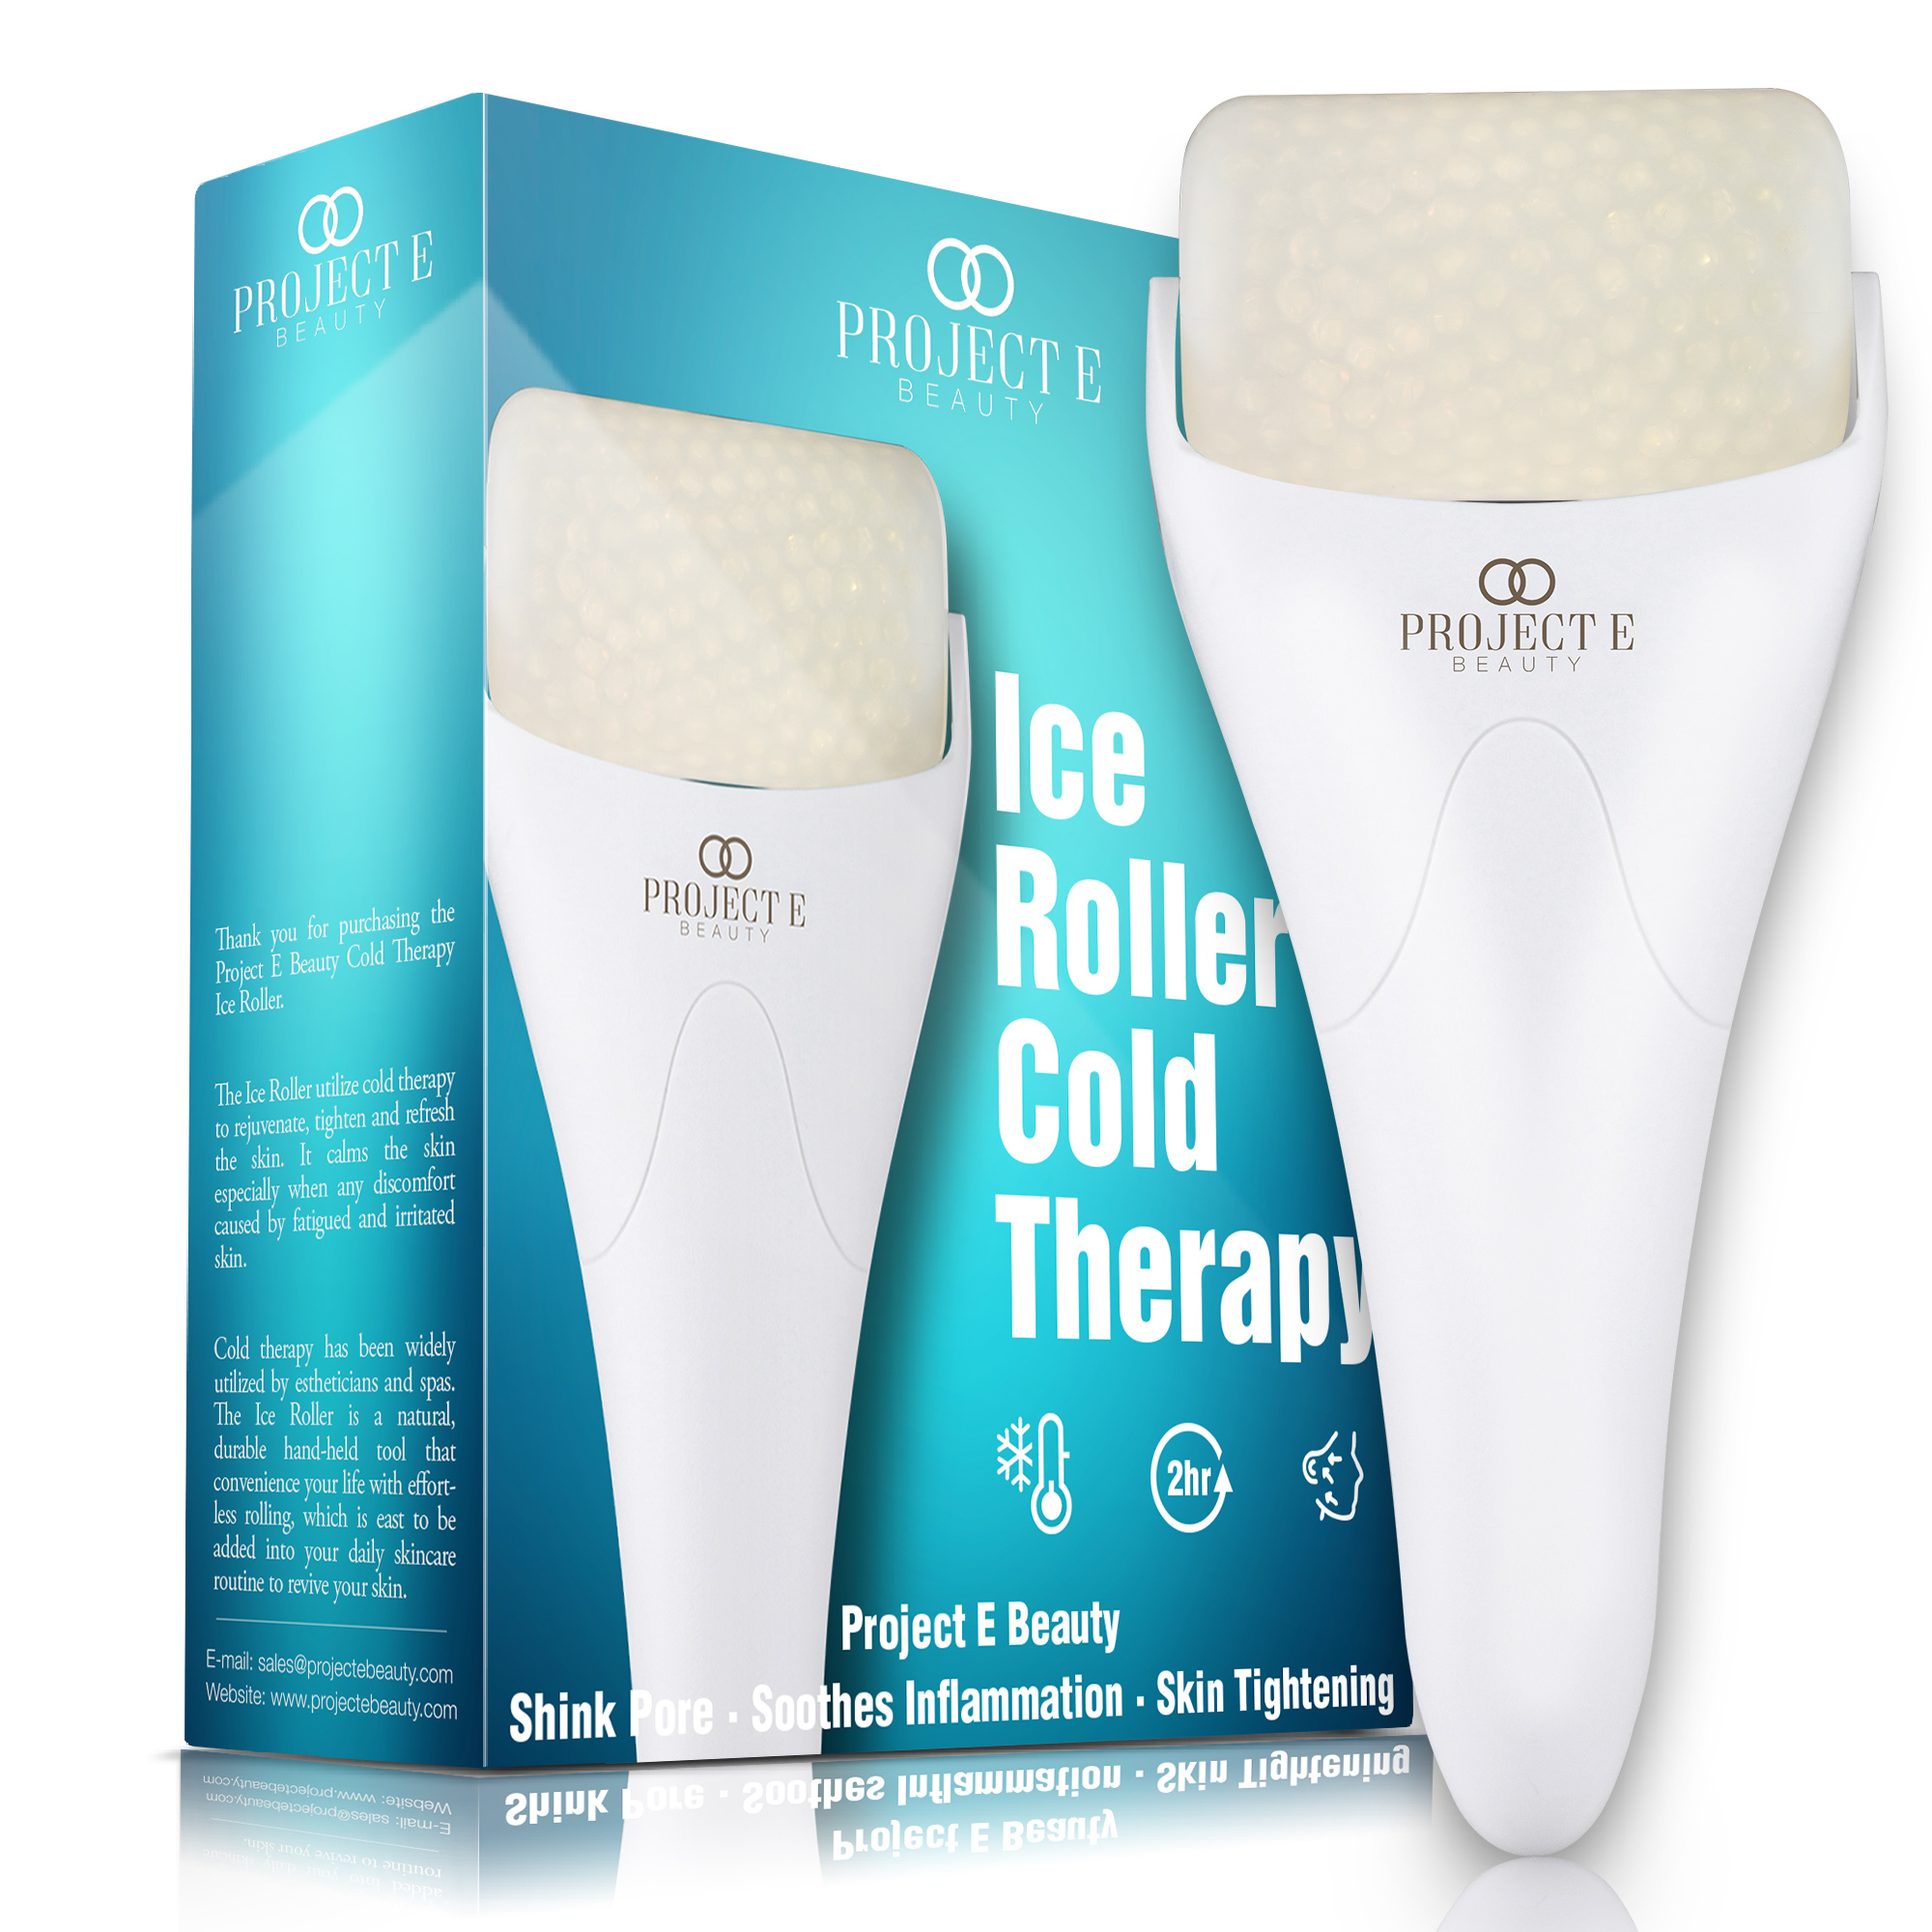 Project E Beauty The Ice Roller | Cryotherapy Treatment | Puffiness & Under Eye Bags | Dark Circles - image 1 of 9